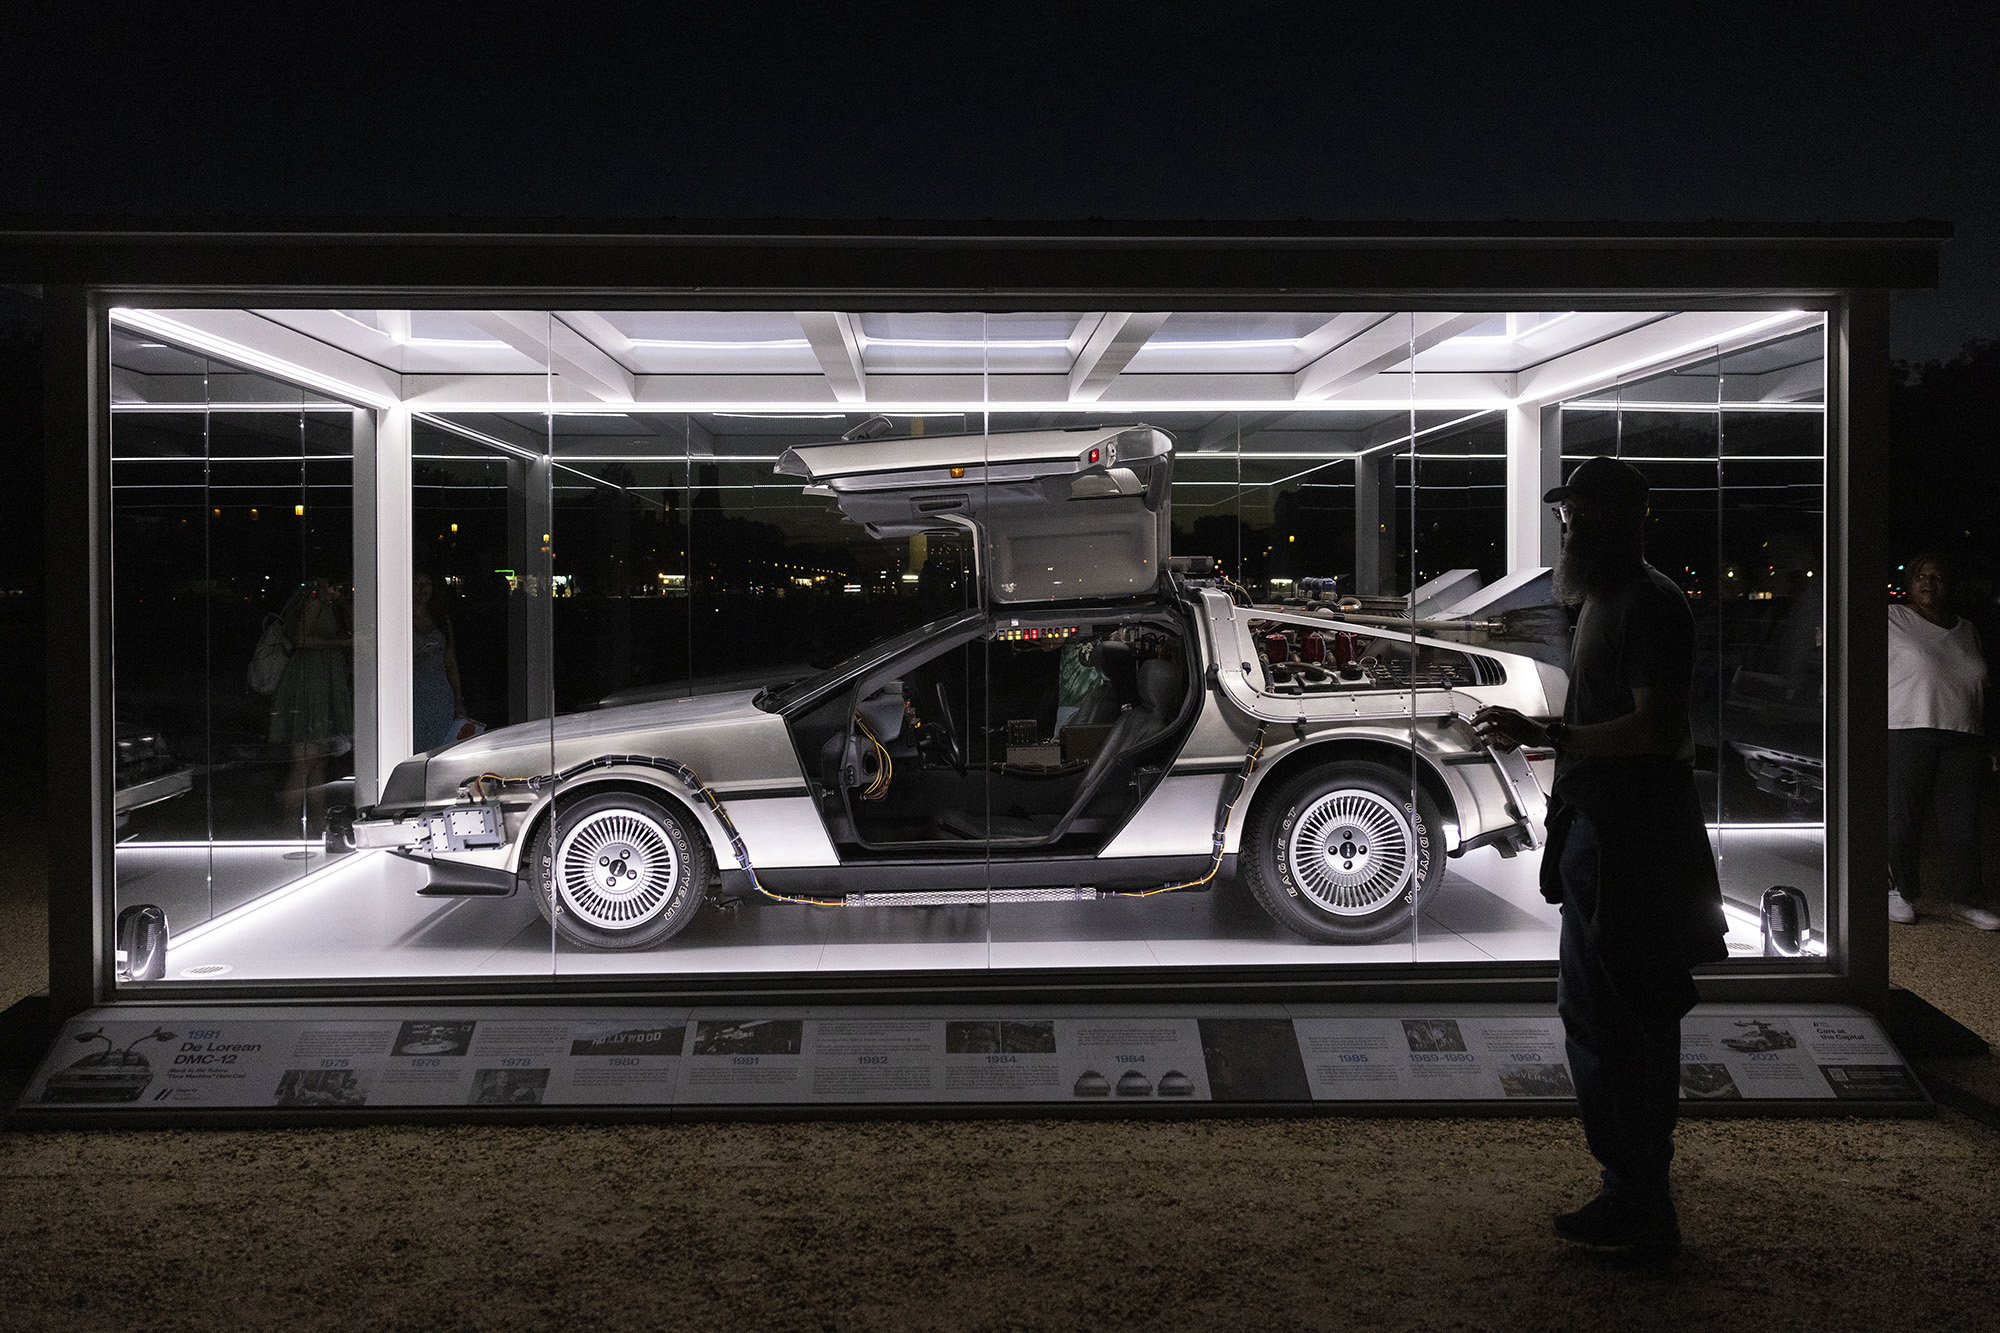 DeLorean teases ‘Back to the Future’-style comeback as electric vehicle